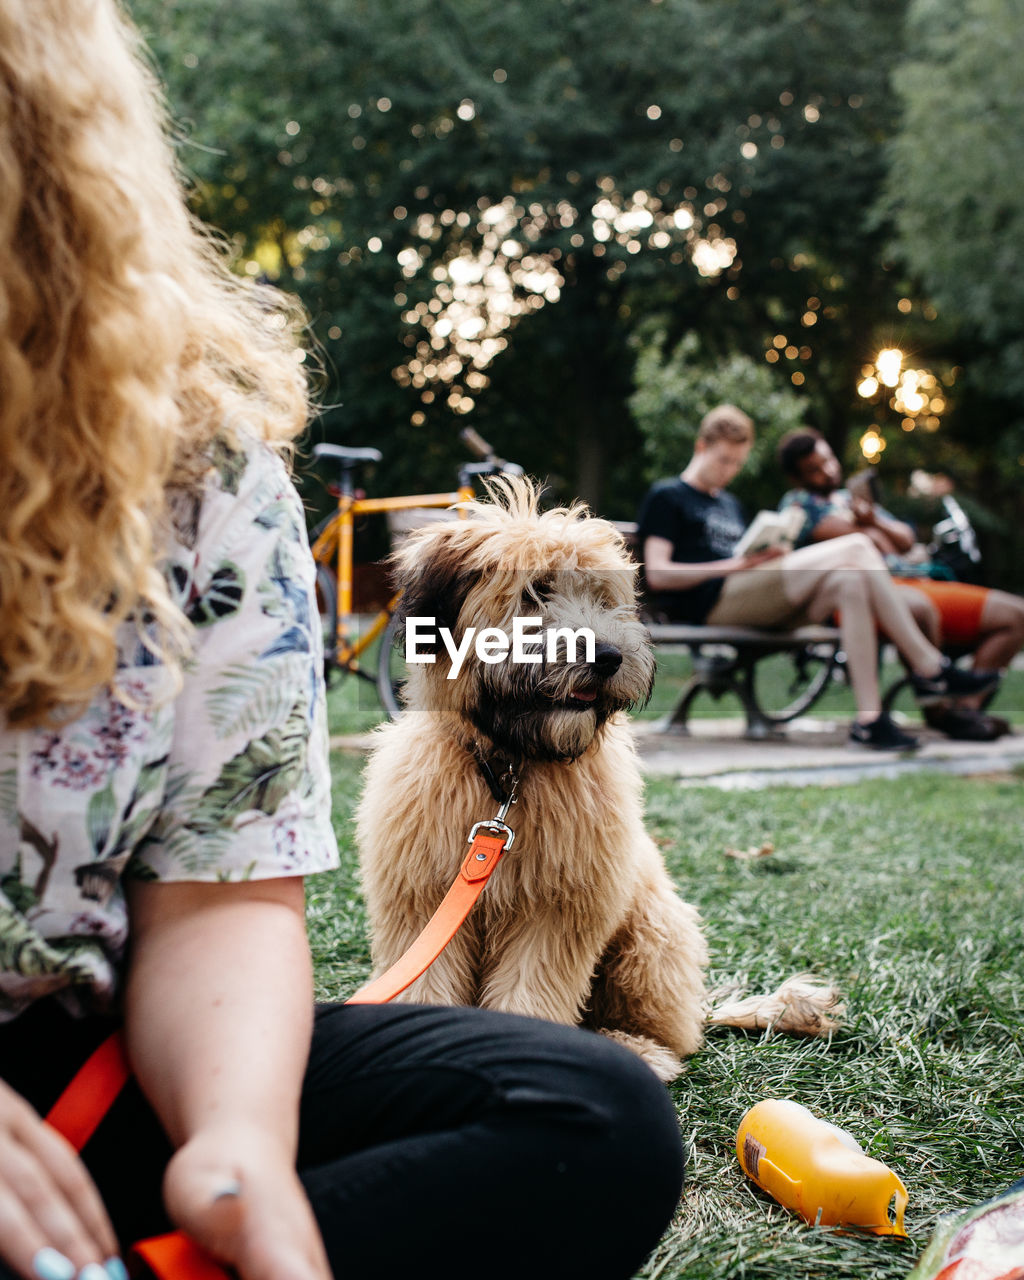 Cropped image of woman with dog sitting in park